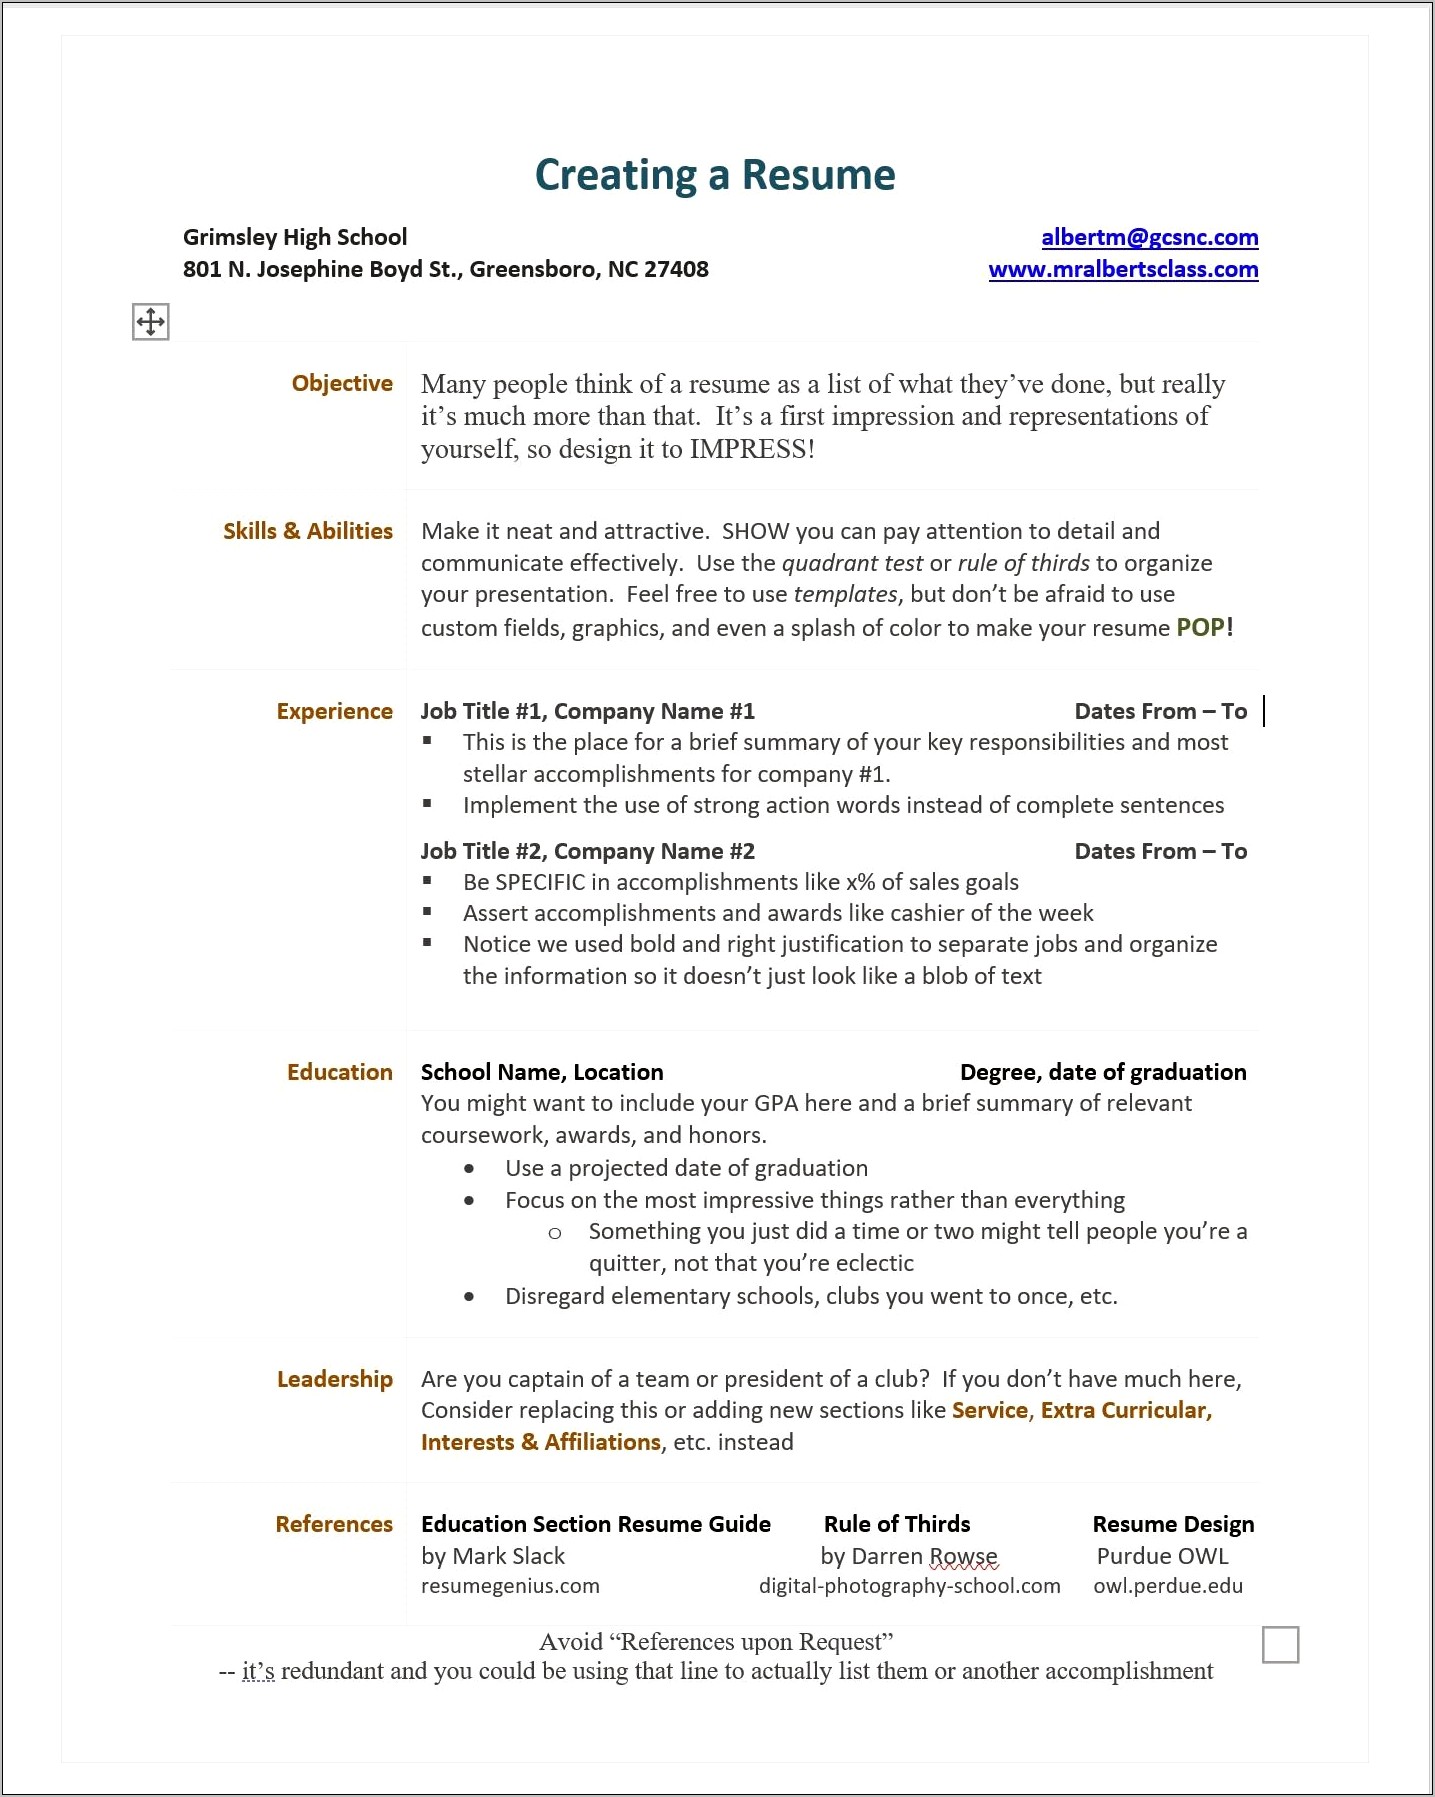 Action Words On Resume For Accomplishments